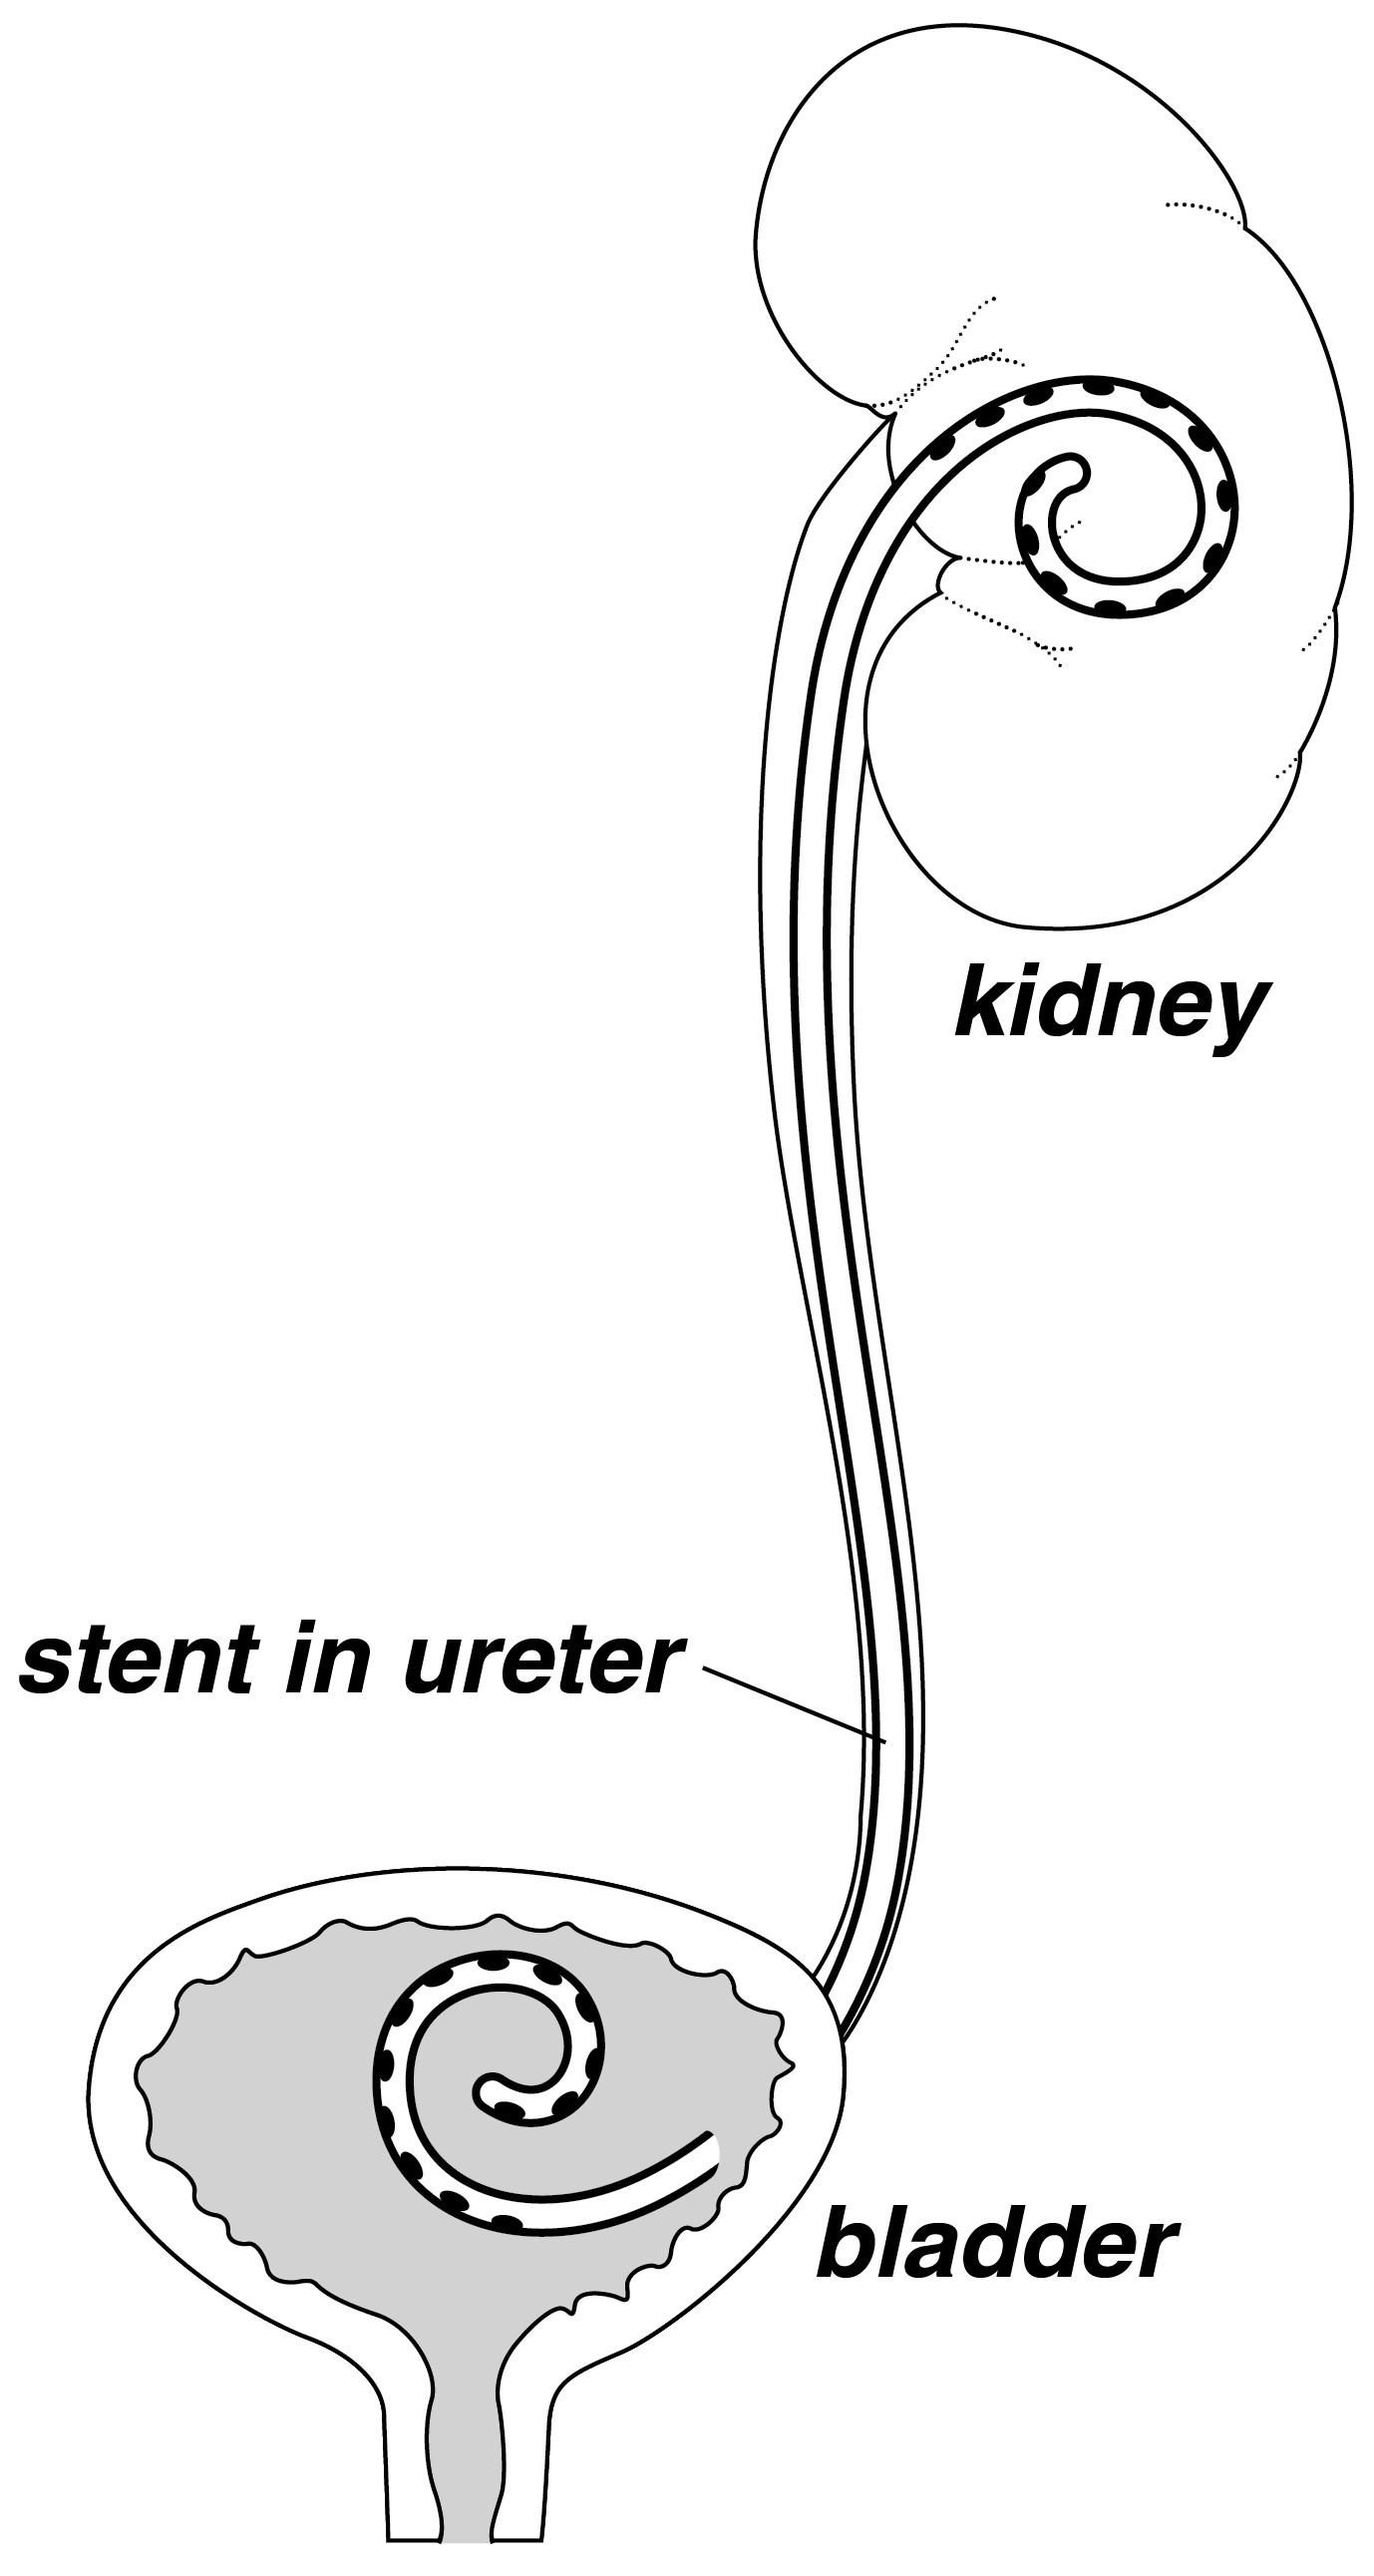 Can You Drink Alcohol With a Kidney Stent?